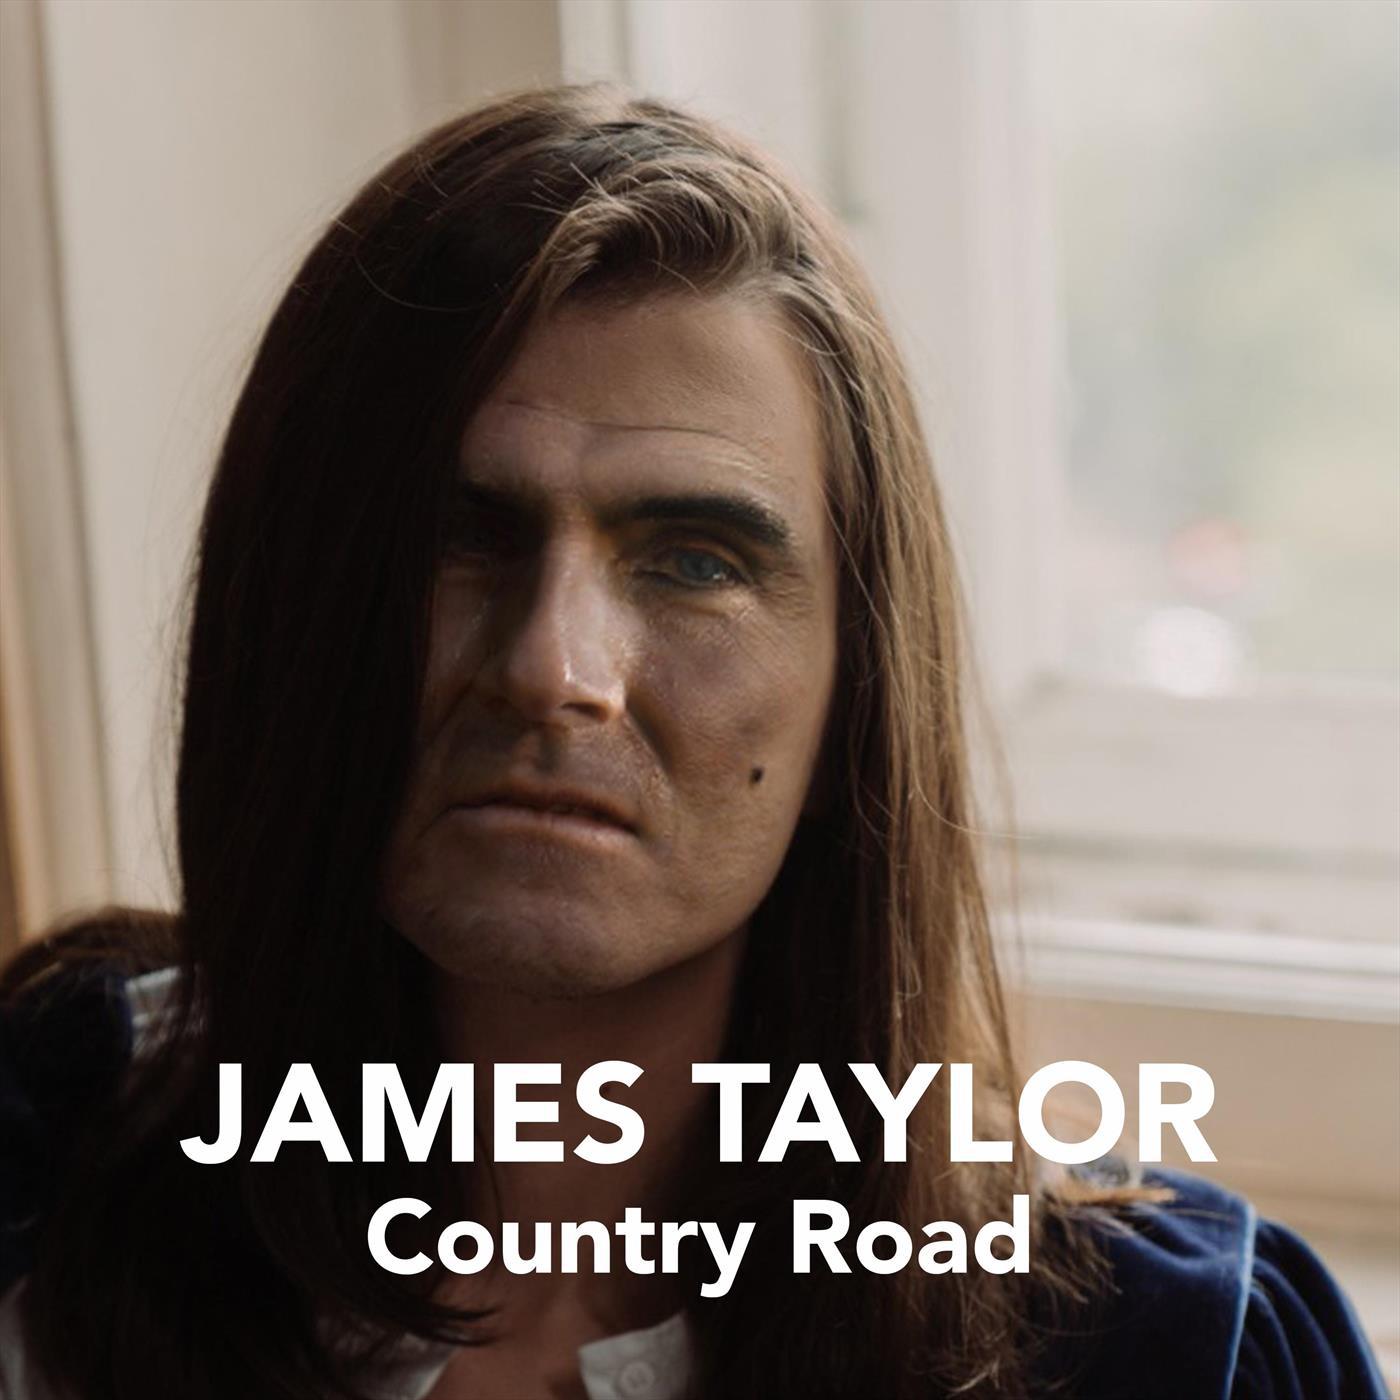 James Taylor - Oh Baby, Don’t You Loose Your Lip on Me